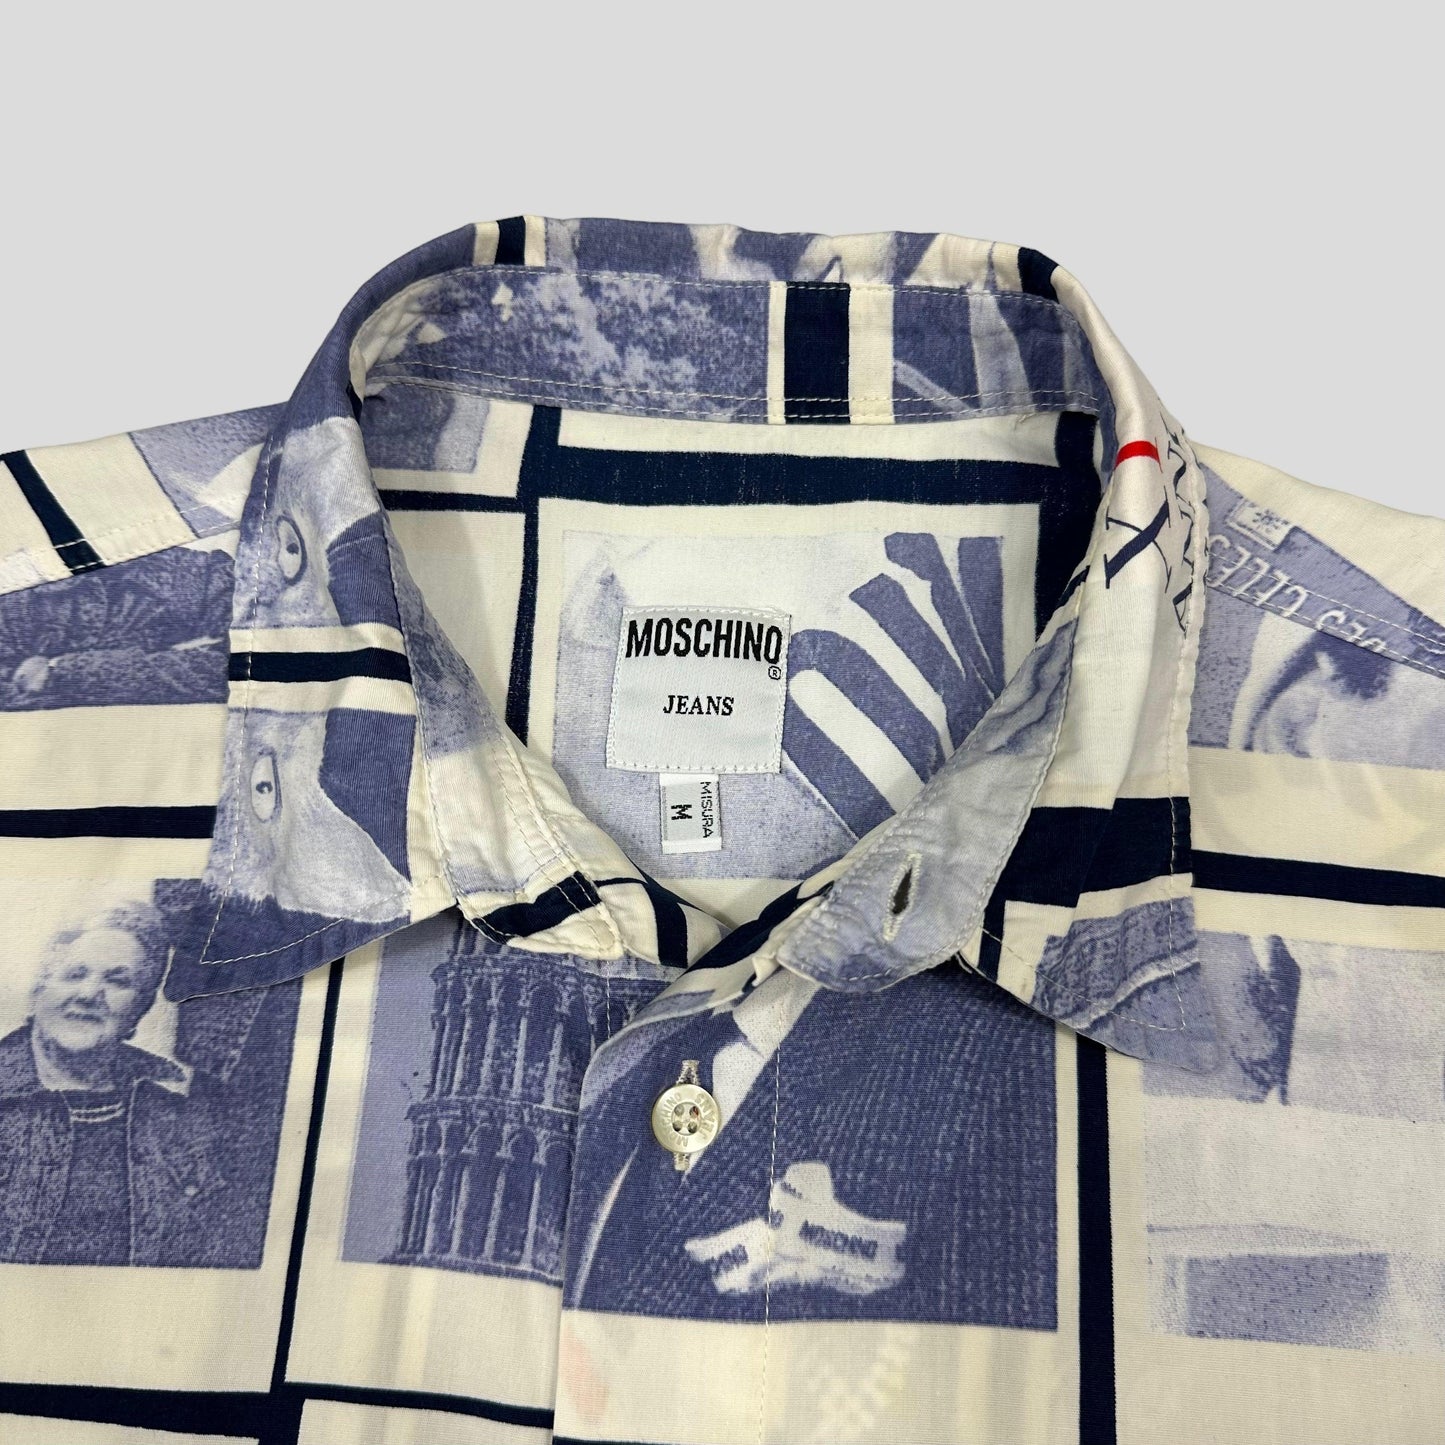 Moschino Jeans 1995 Blue Polaroid Shirt - M/L - Known Source